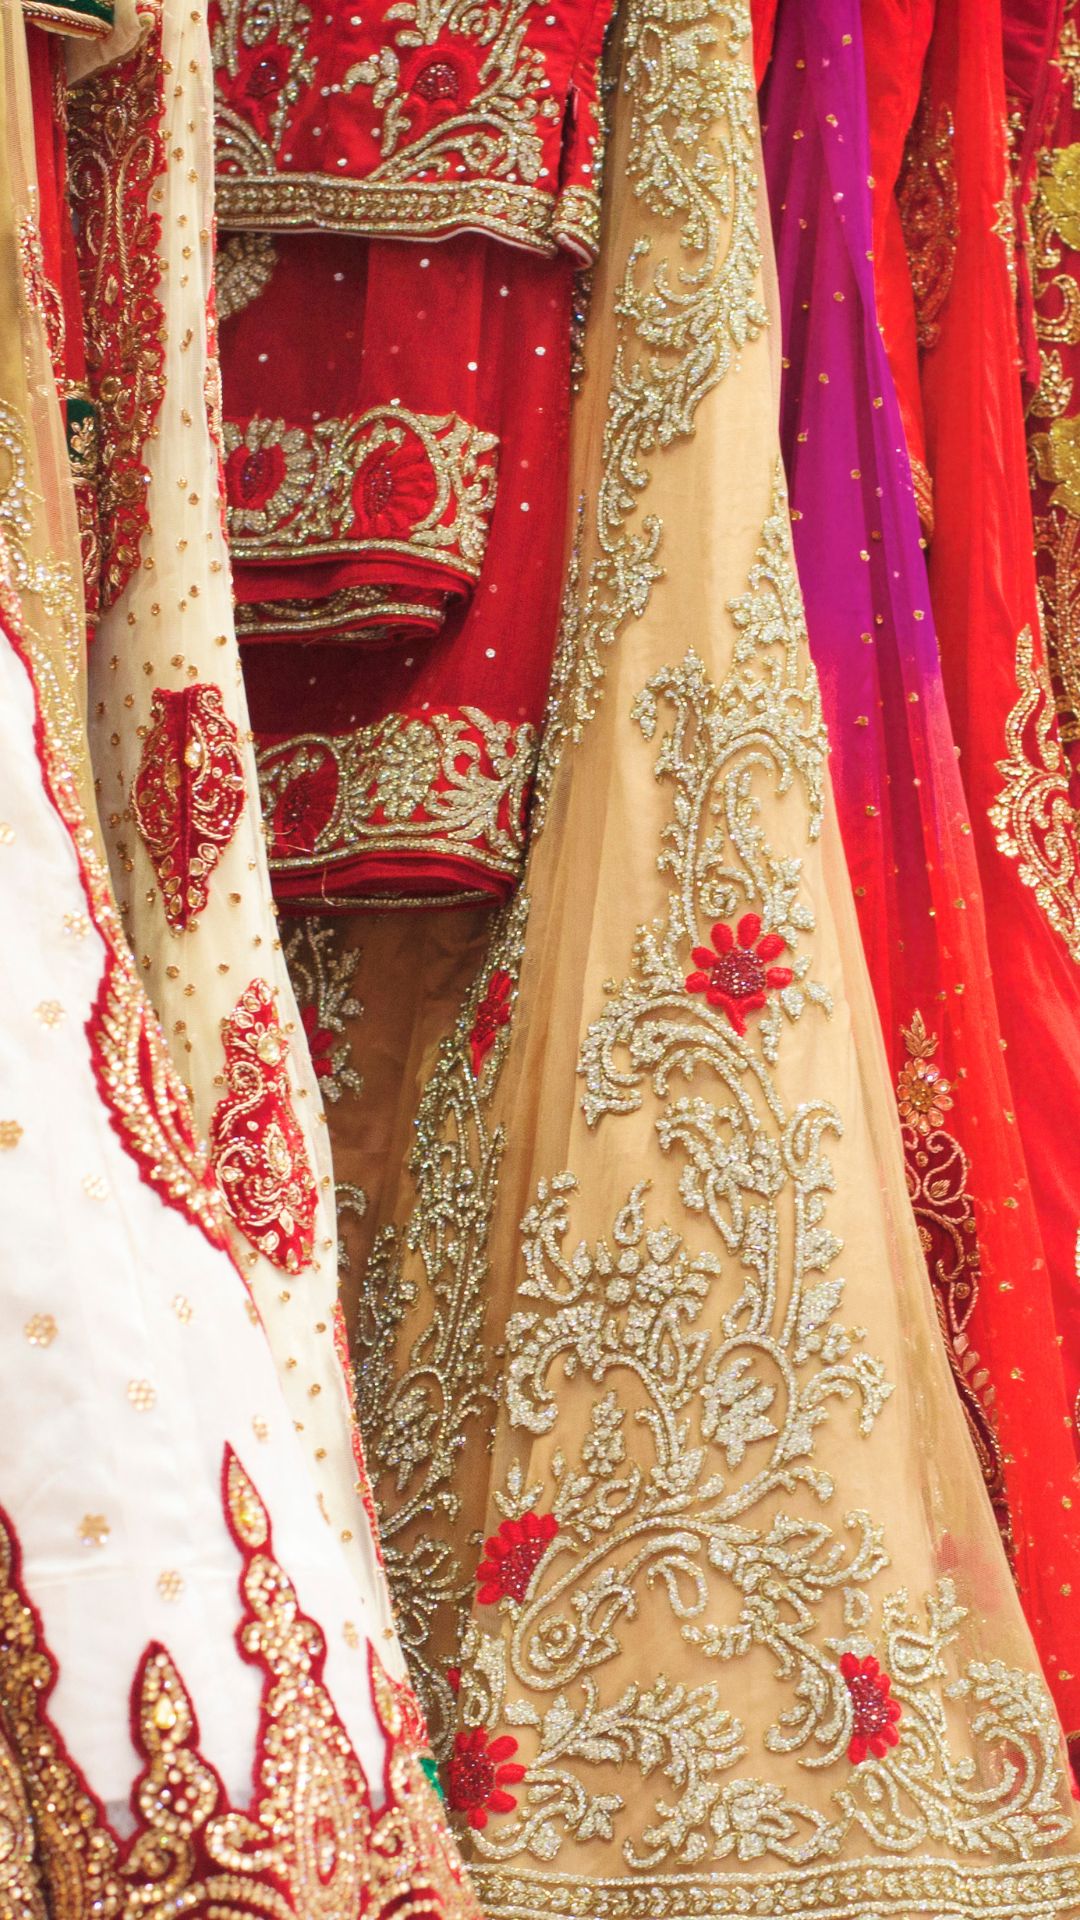 Find Your Dream Wedding Dress at Koskii Store Commercial Street, Bangalore